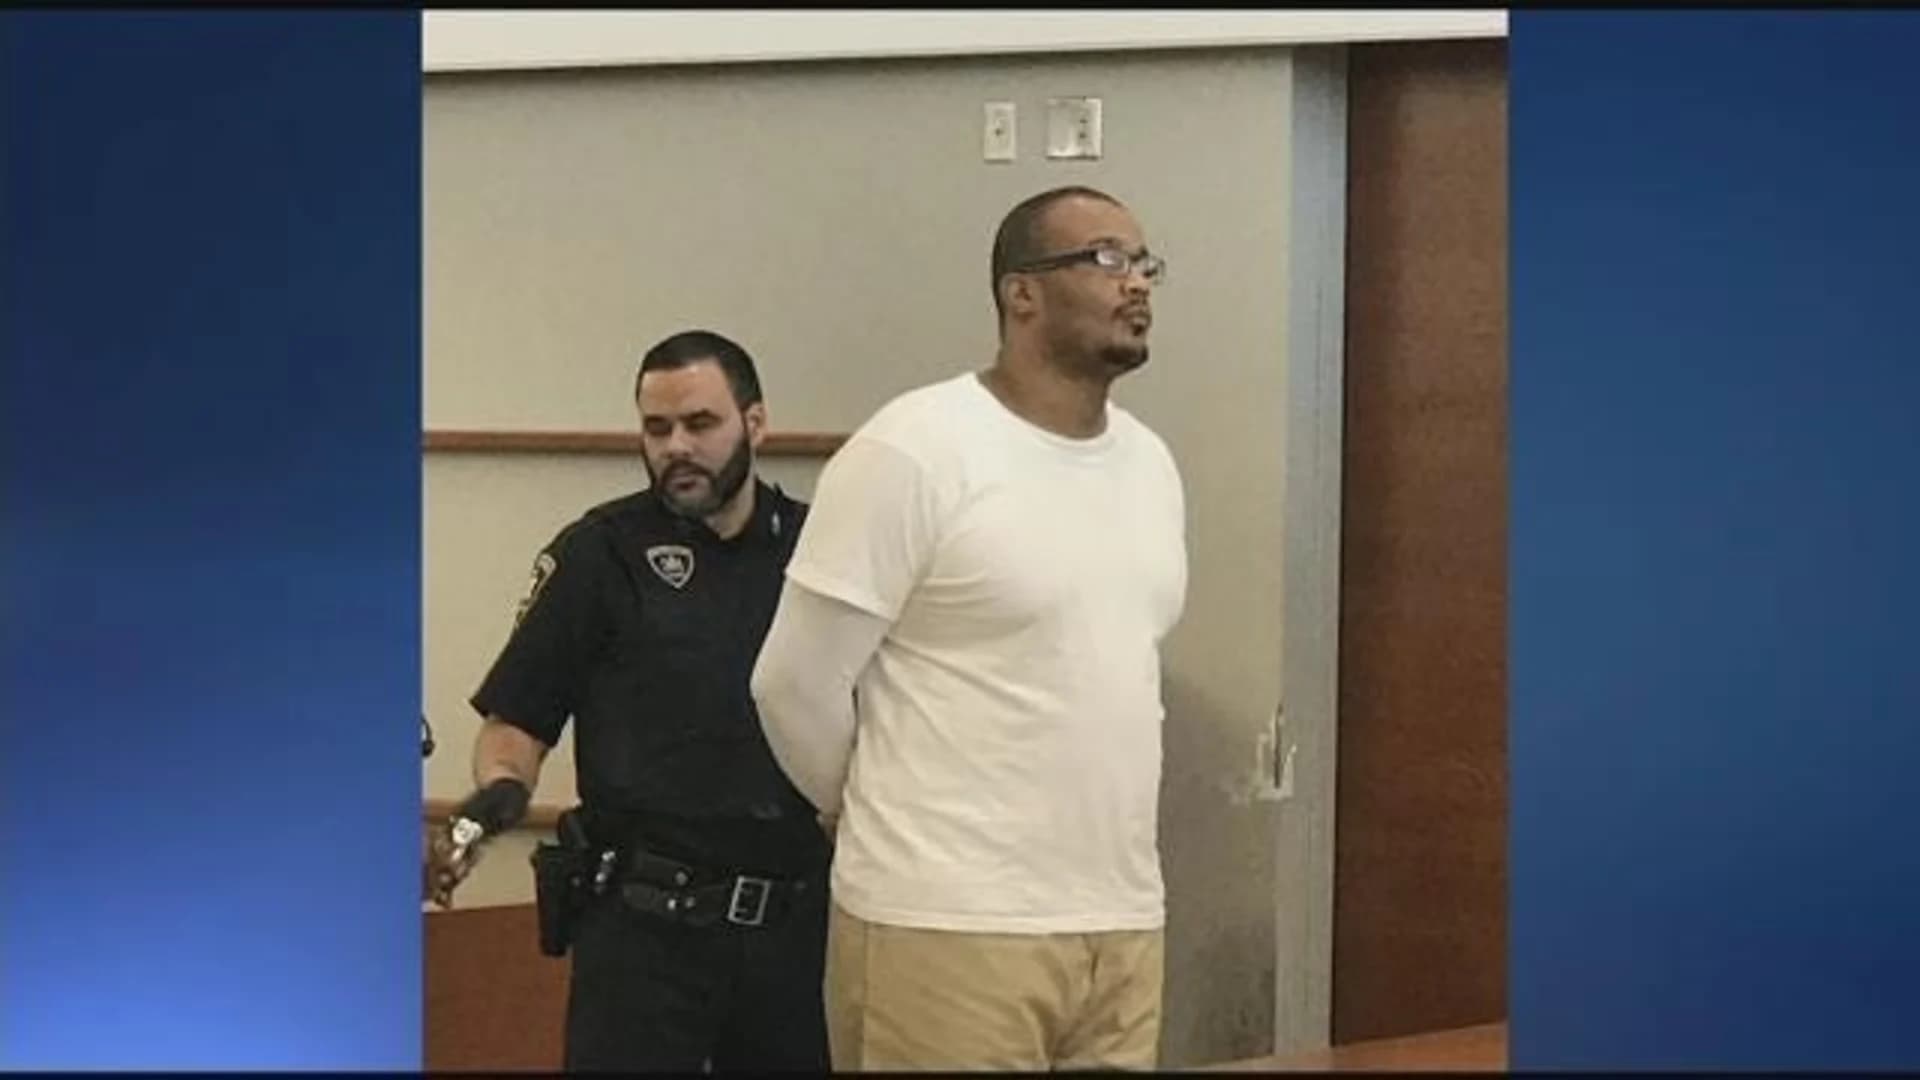 Man accused of slaying, dismembering woman appears in court